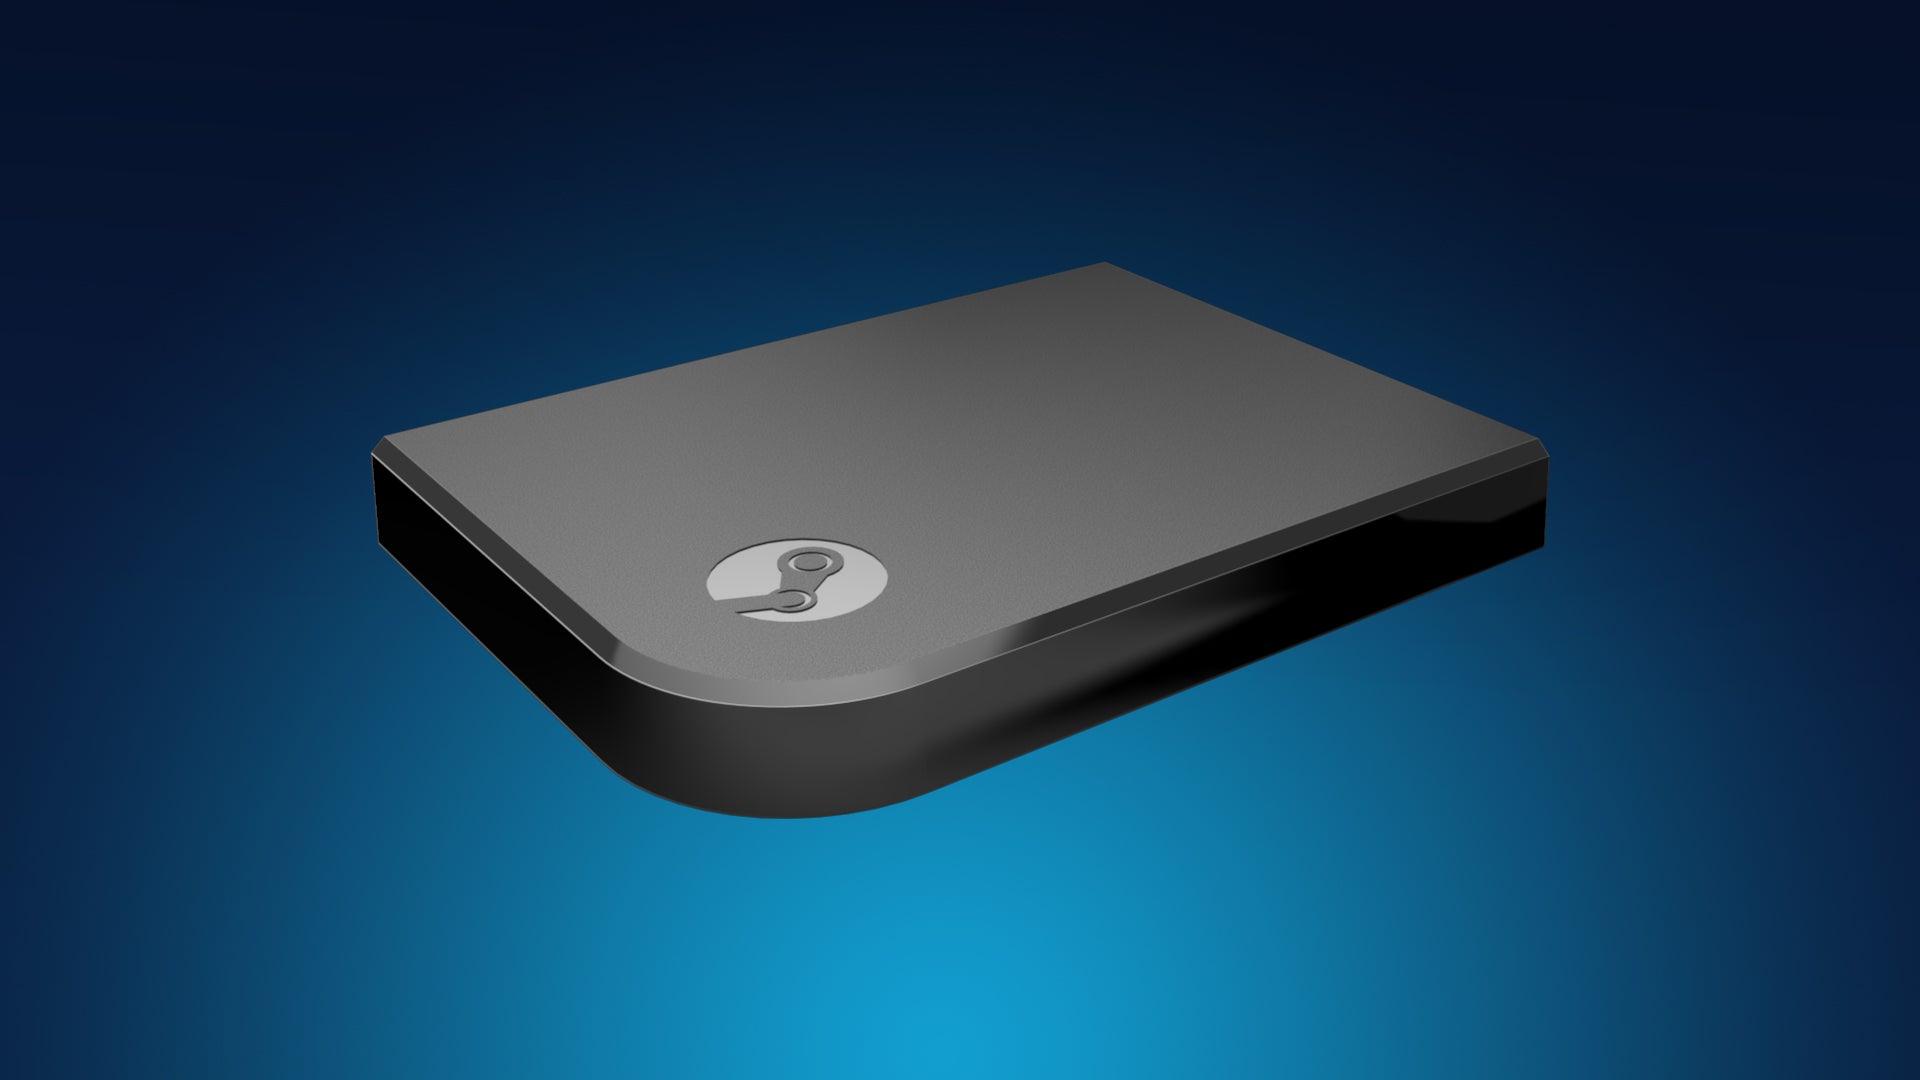 Image for Steam Link to be integrated into new Samsung TVs